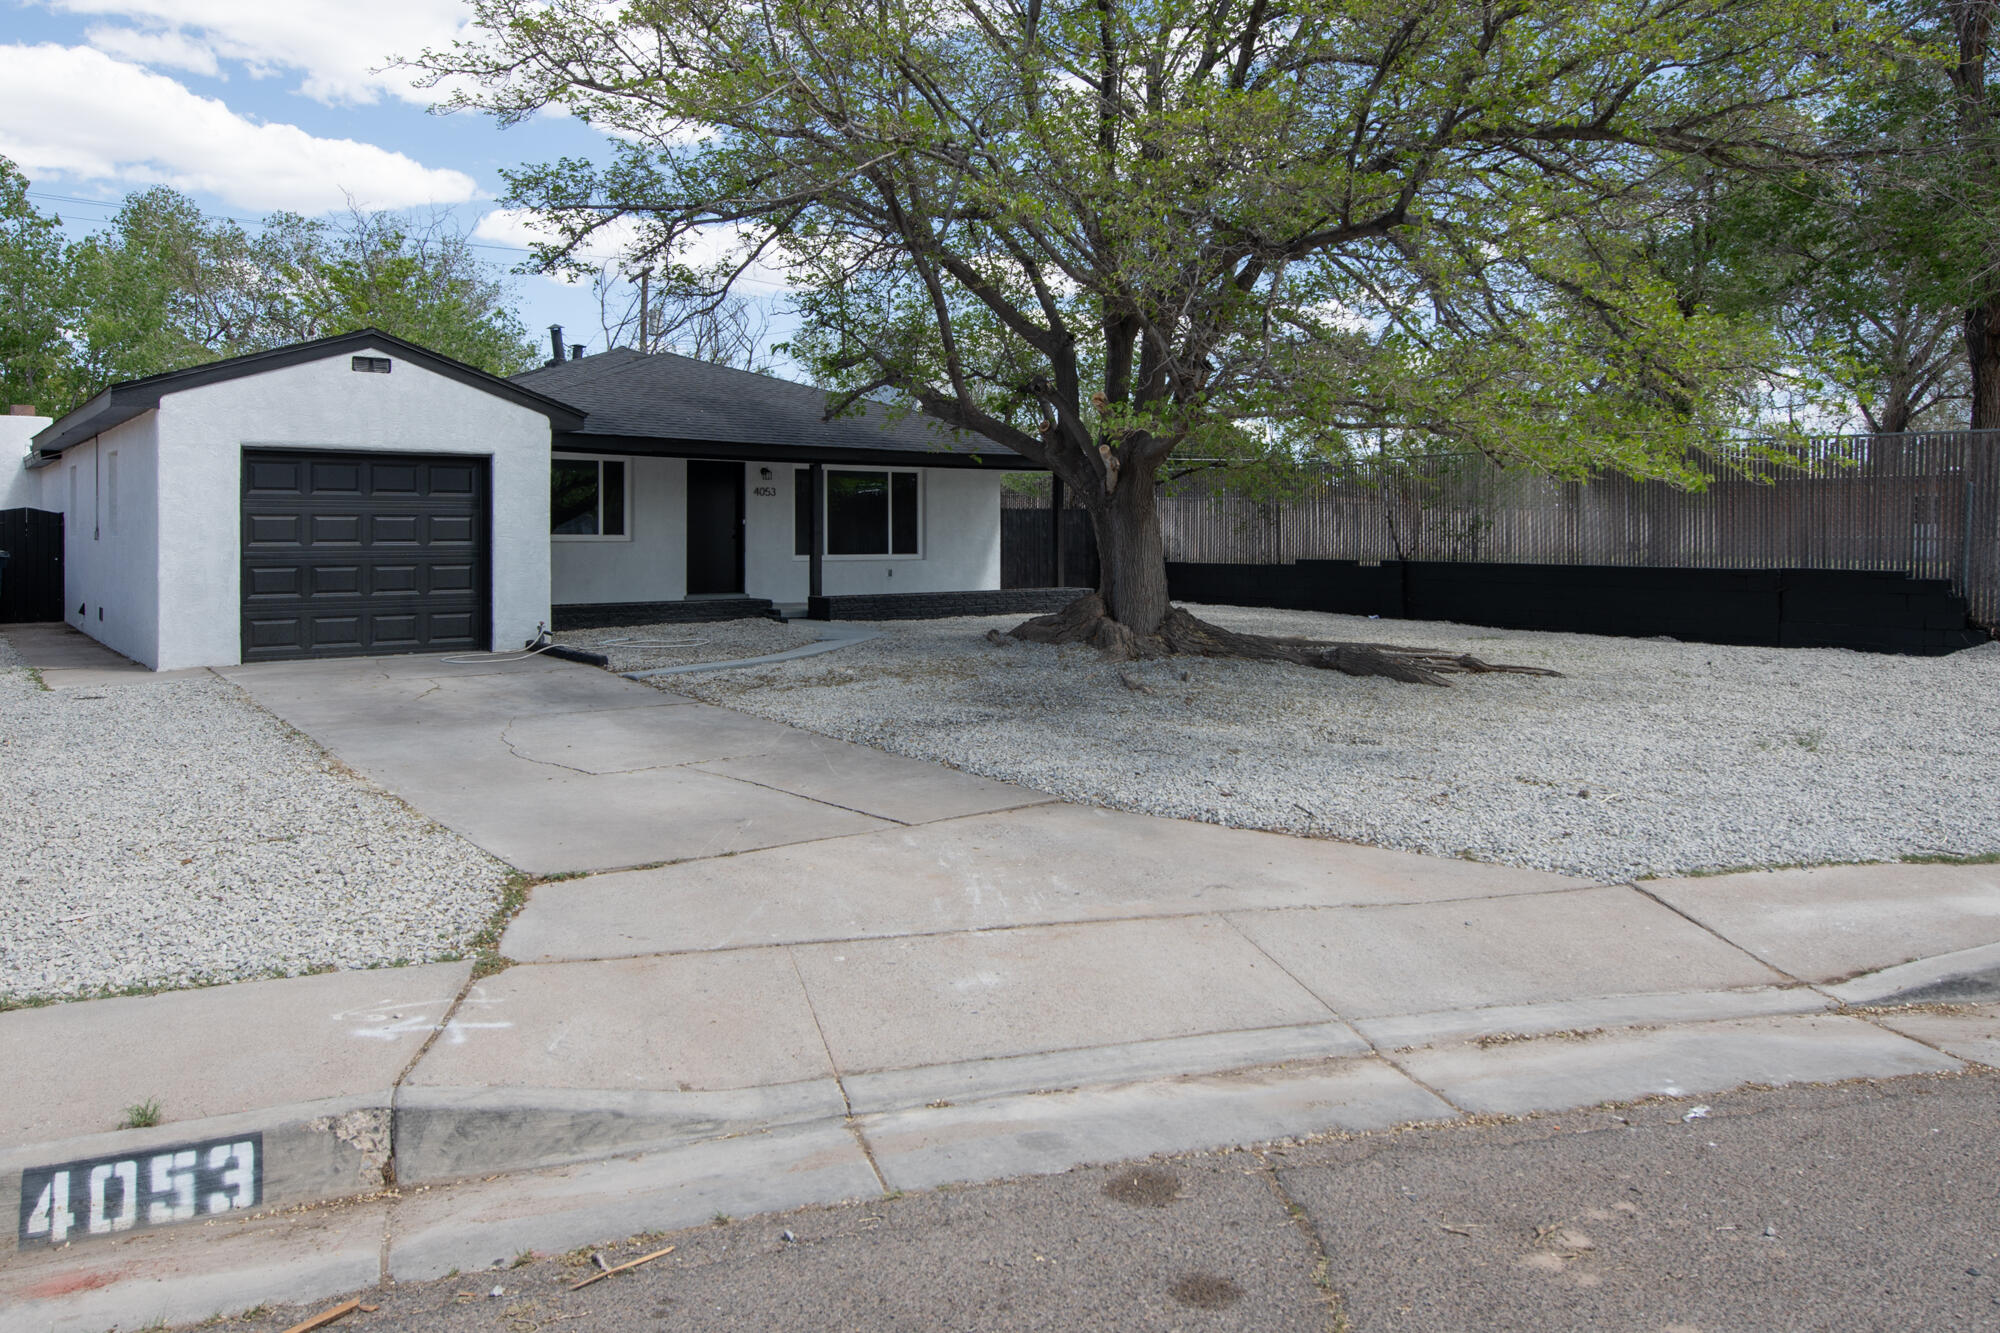 4053 Simms Court SE, Albuquerque, New Mexico 87108, 3 Bedrooms Bedrooms, ,2 BathroomsBathrooms,Residential,For Sale,4053 Simms Court SE,1061547